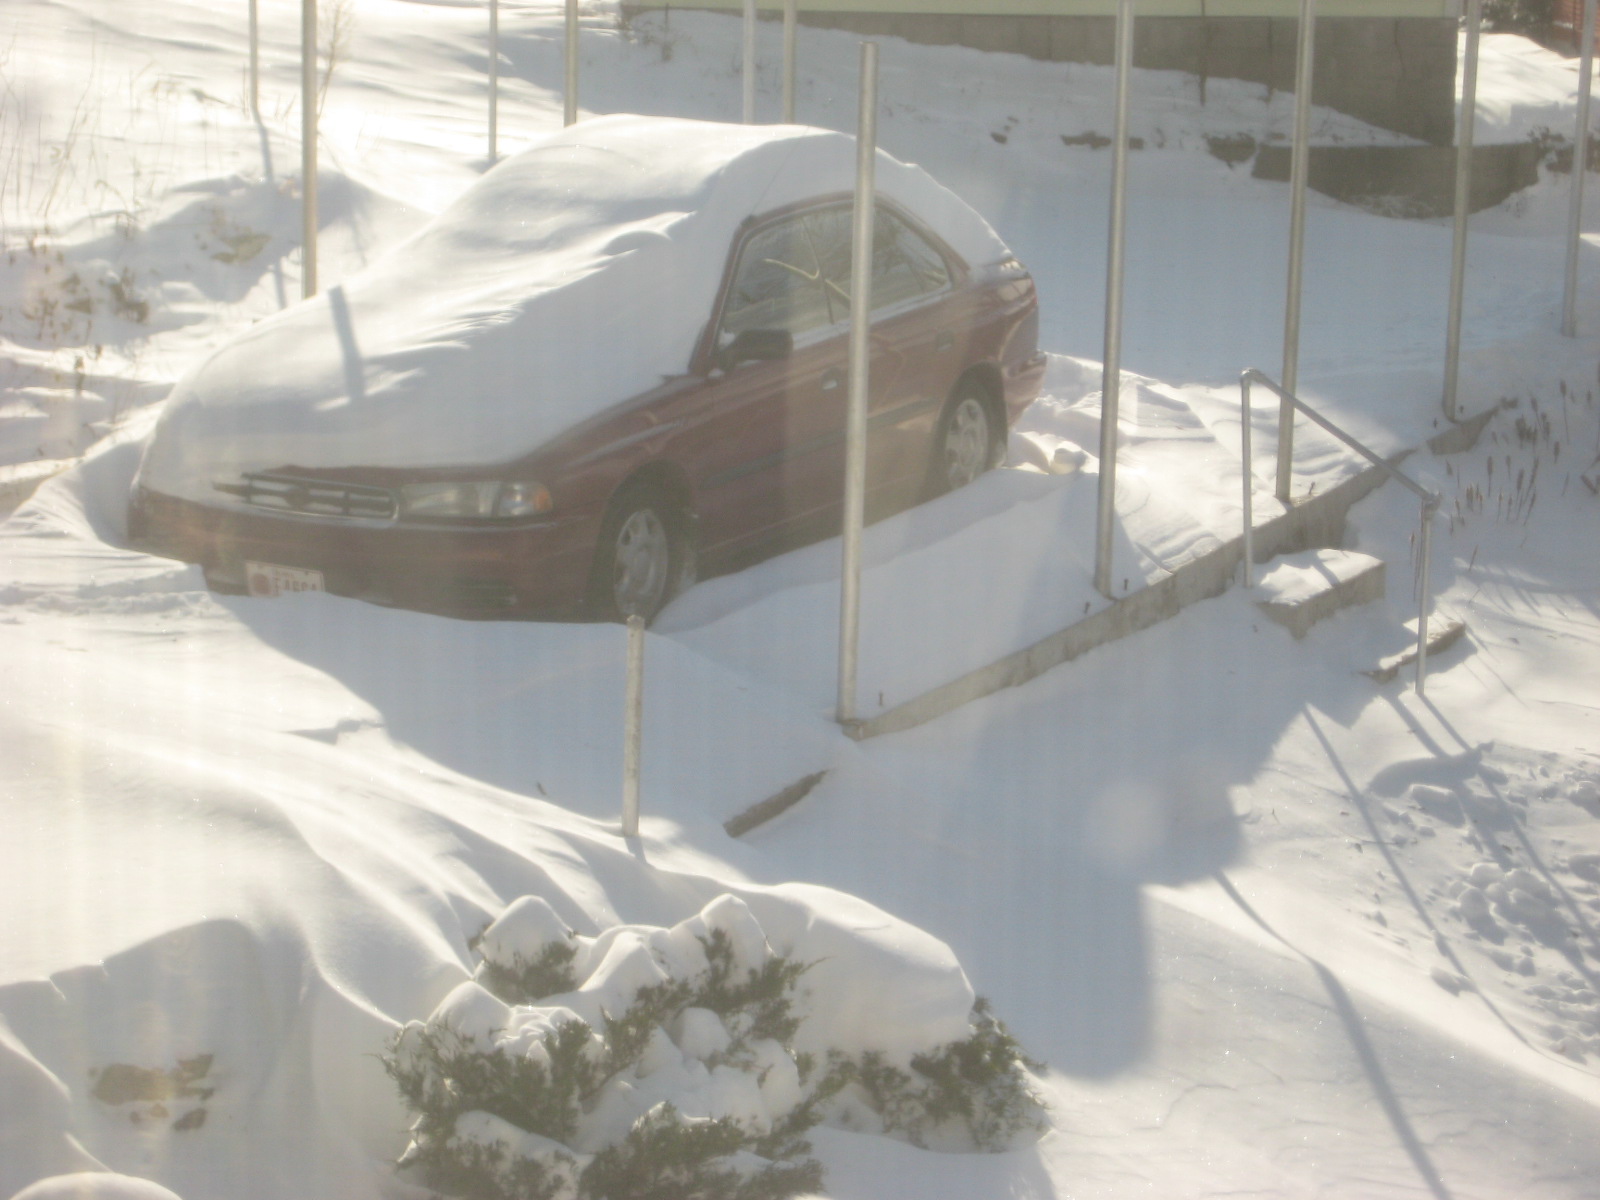 Downward view of a red car buried in deep snow